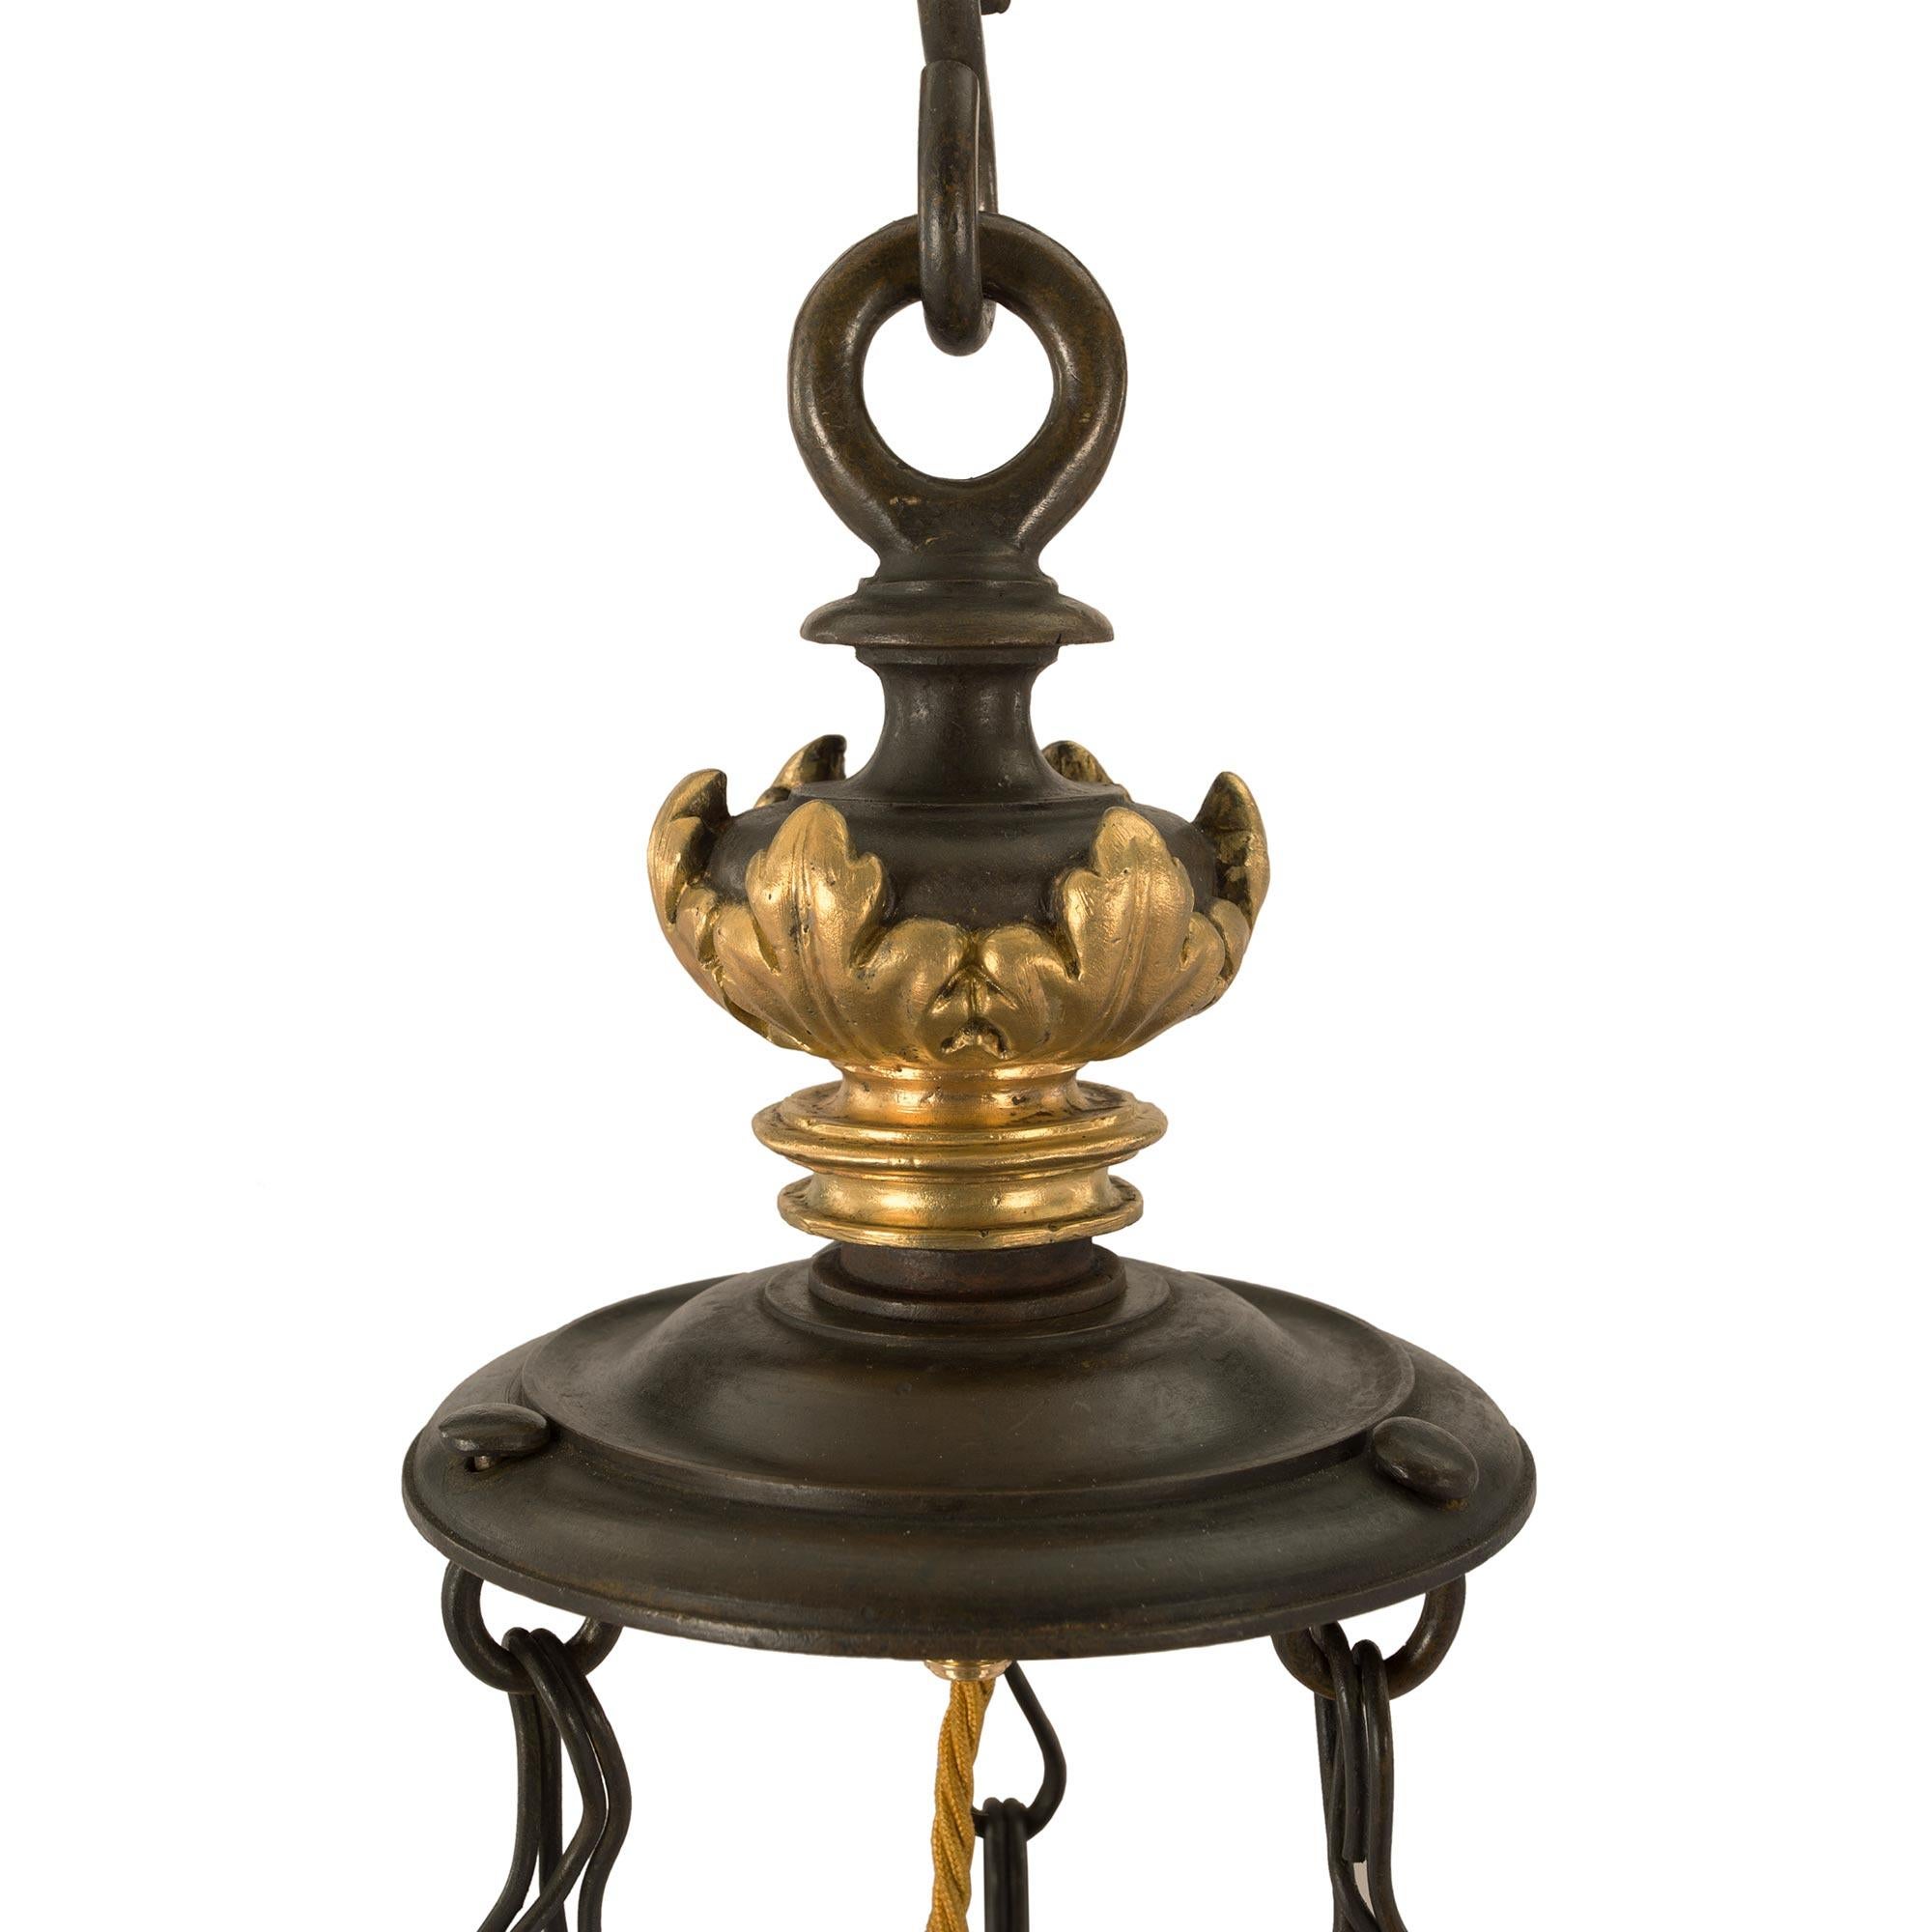 Italian 19th Century Neoclassical St. Patinated Bronze and Ormolu Lantern For Sale 1